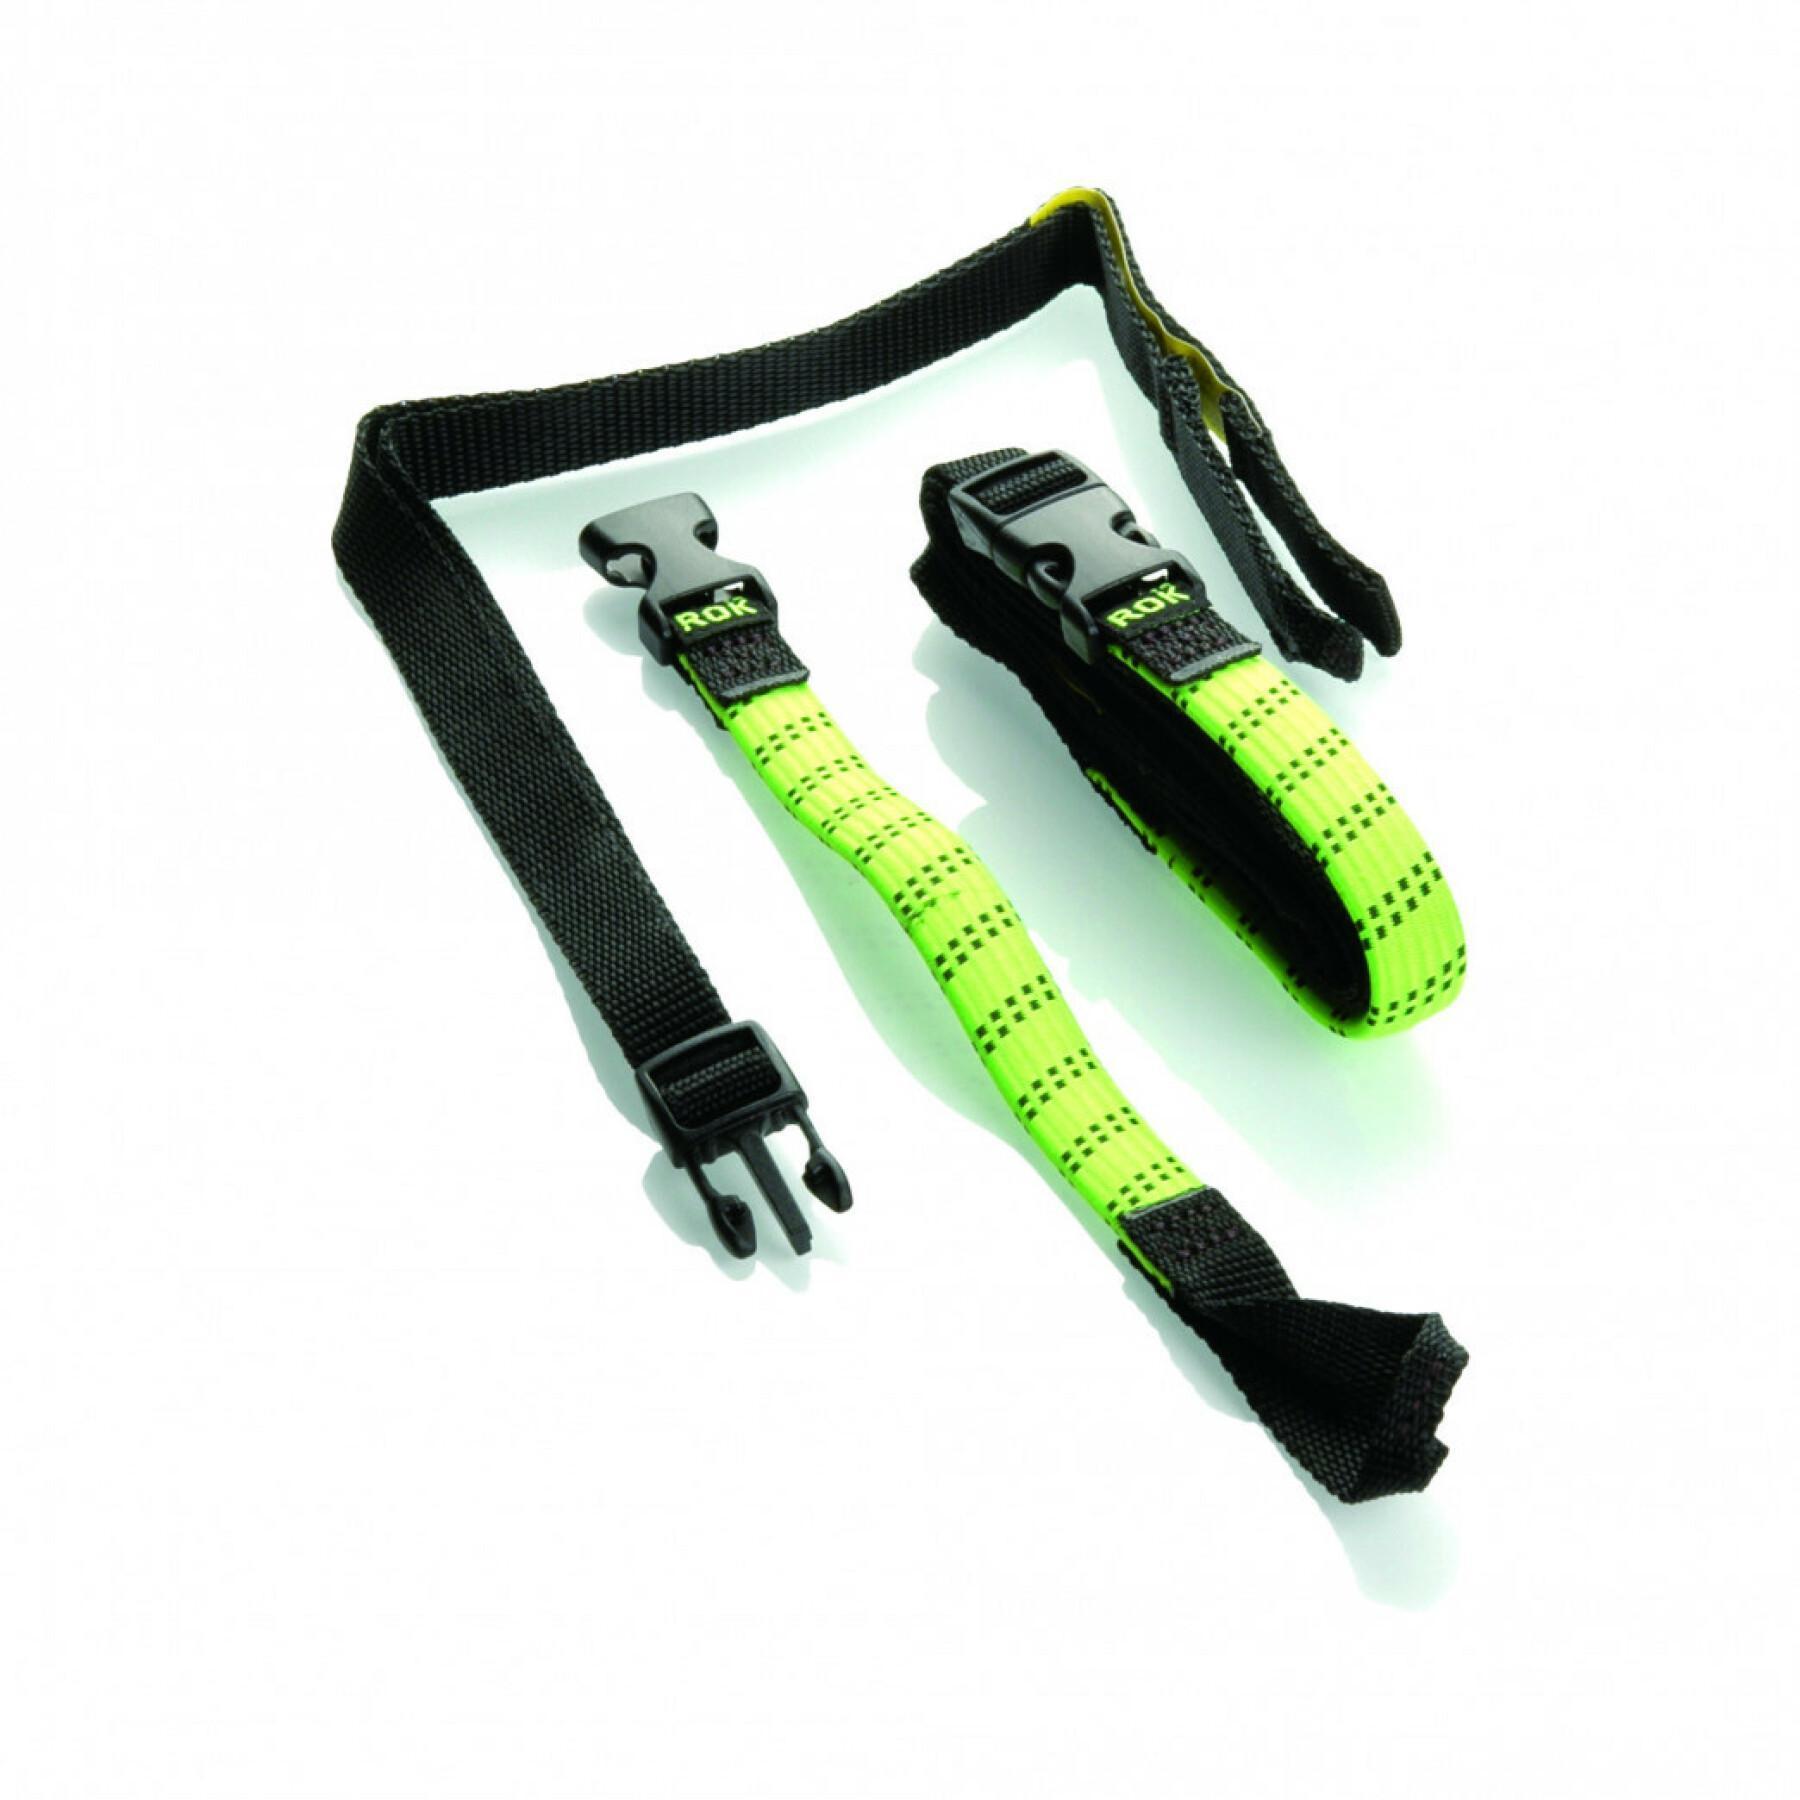 Motorcycle tensioning strap Booster Cargo Hd